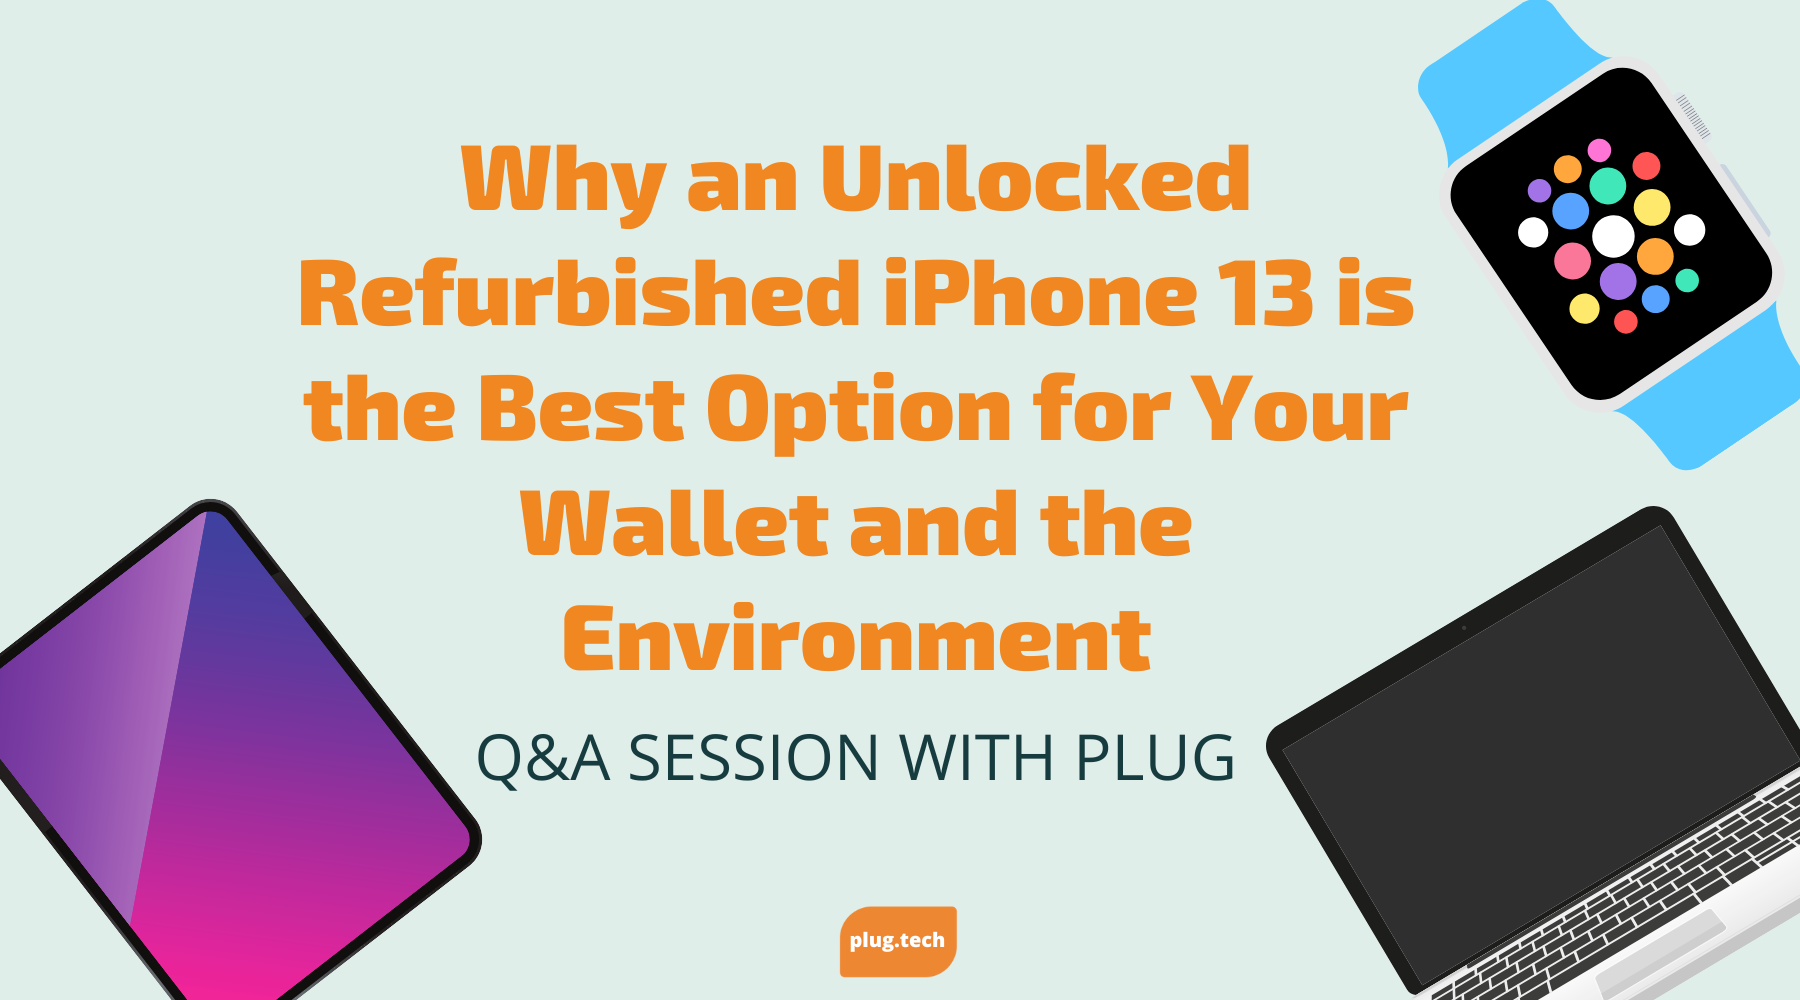 Why an Unlocked Refurbished iPhone 13 is the Best Option for Your Wallet and the Environment